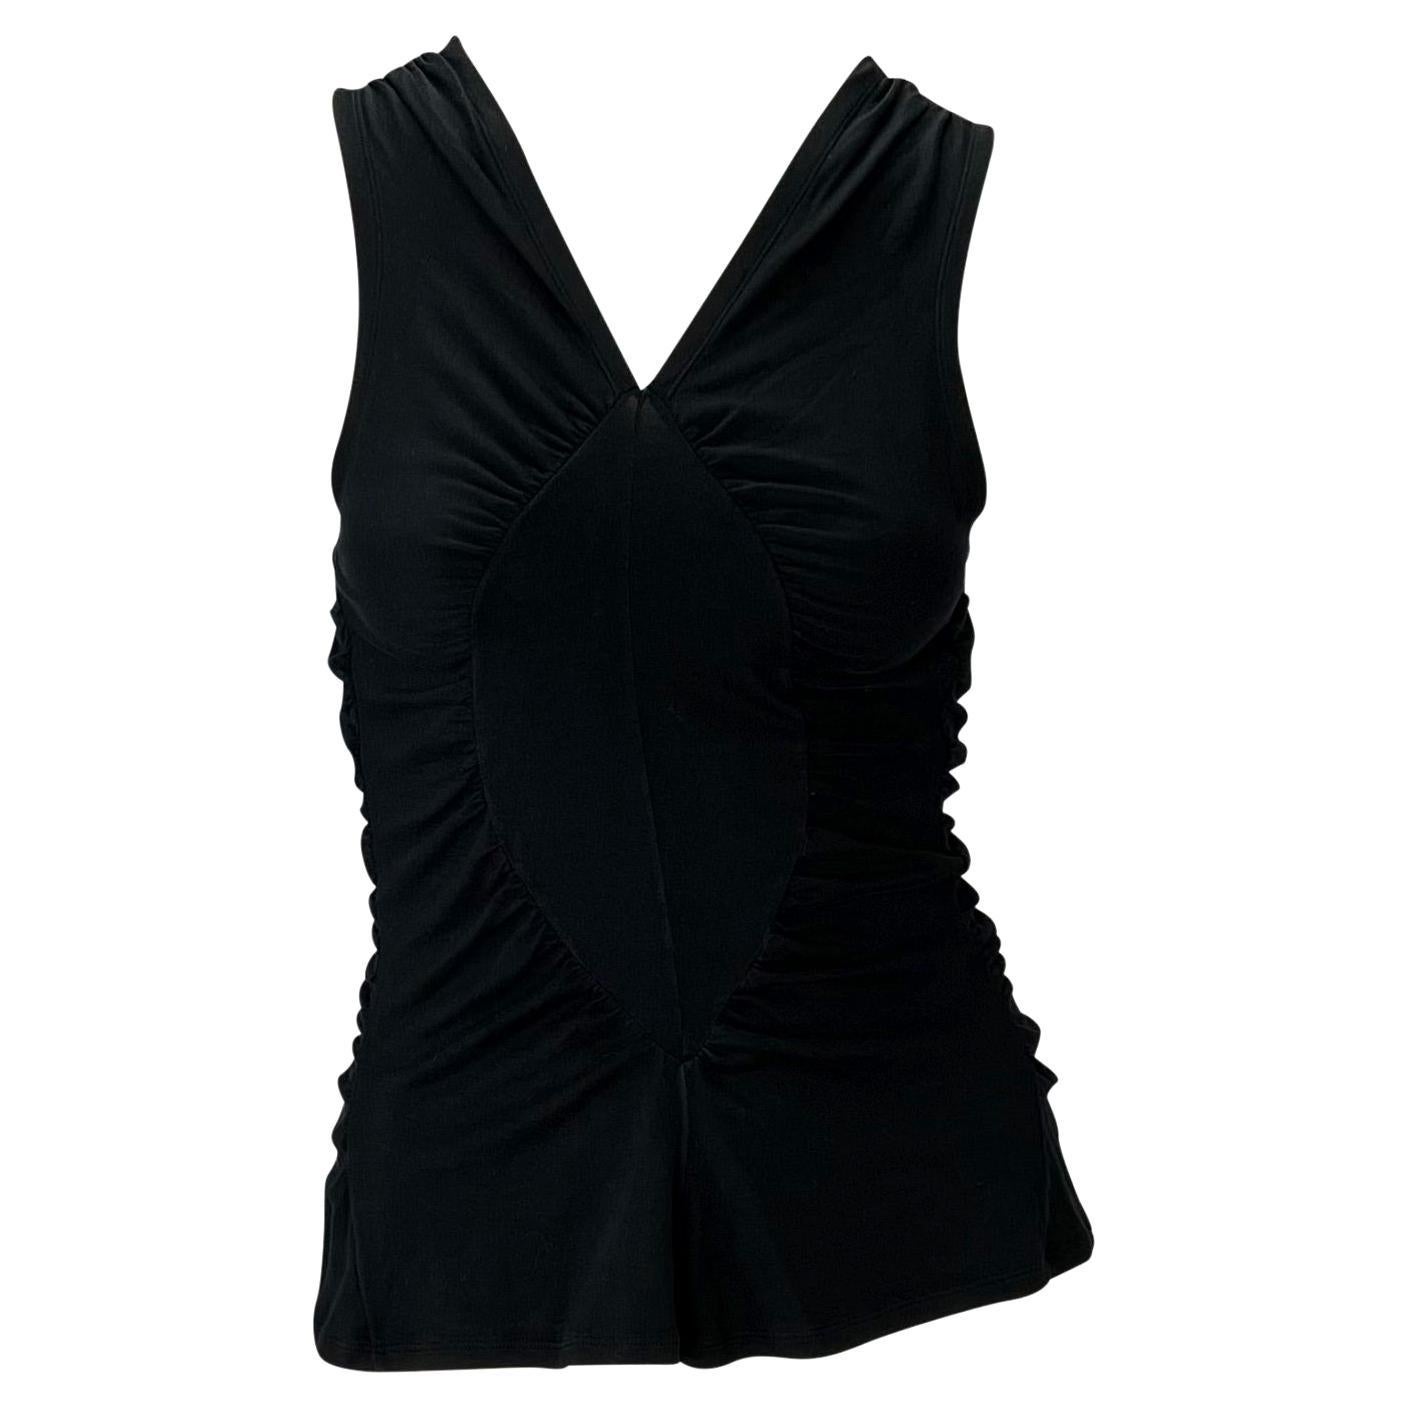 Presenting a black ruched tank top designed by Tom Ford for Yves Saint Laurent Rive Gauche's Spring/Summer 2003 collection. Not your average tank, this piece is all about the power of ruching. Ford used this sewing technique to create identical